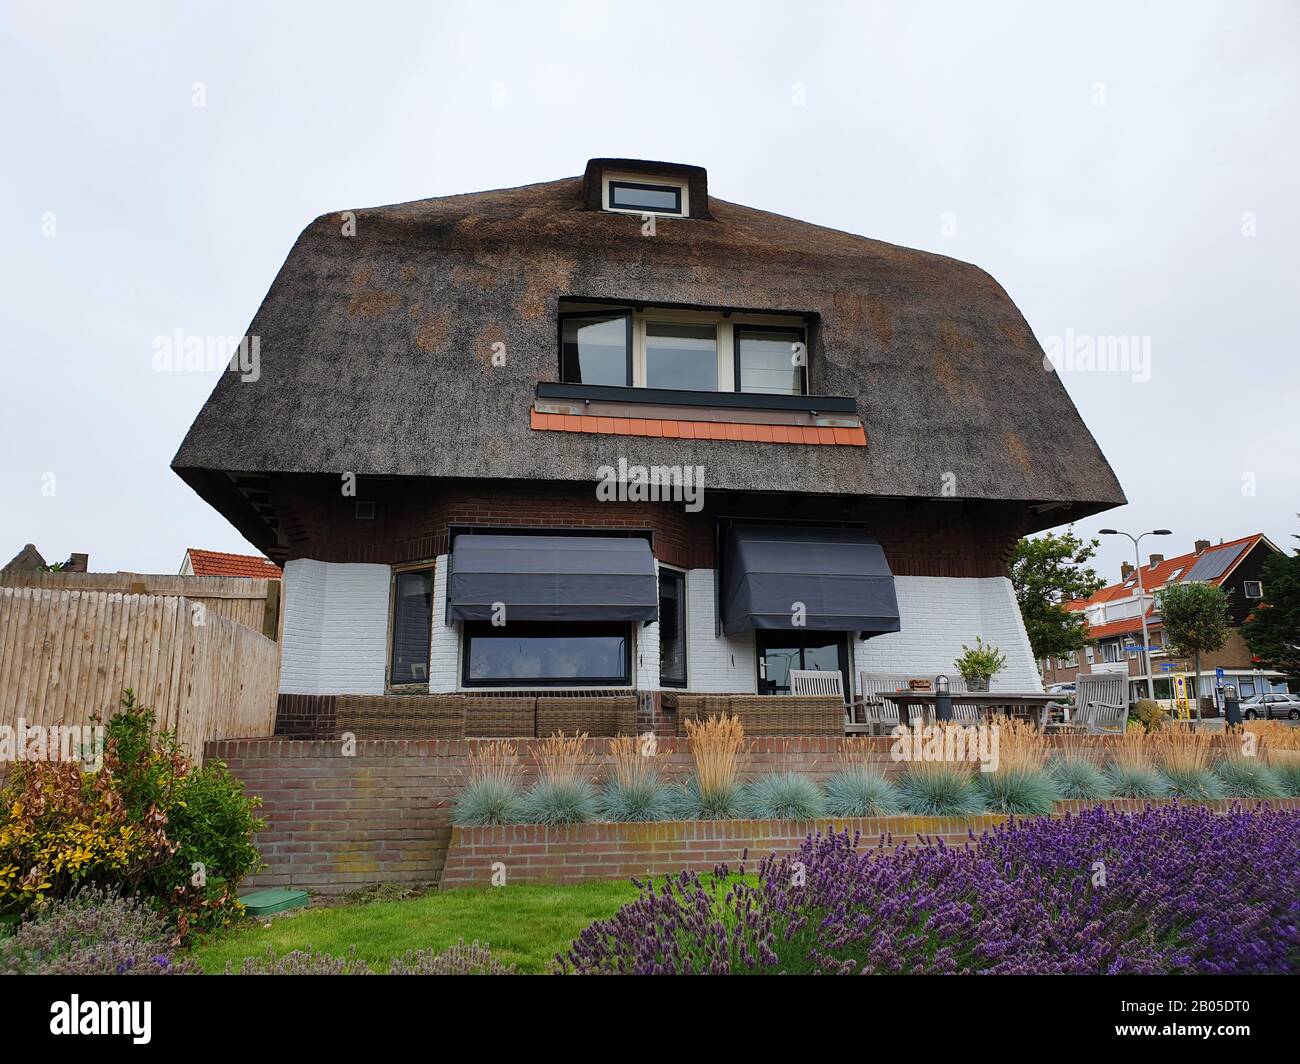 restored thatched roof, Netherlands Stock Photo